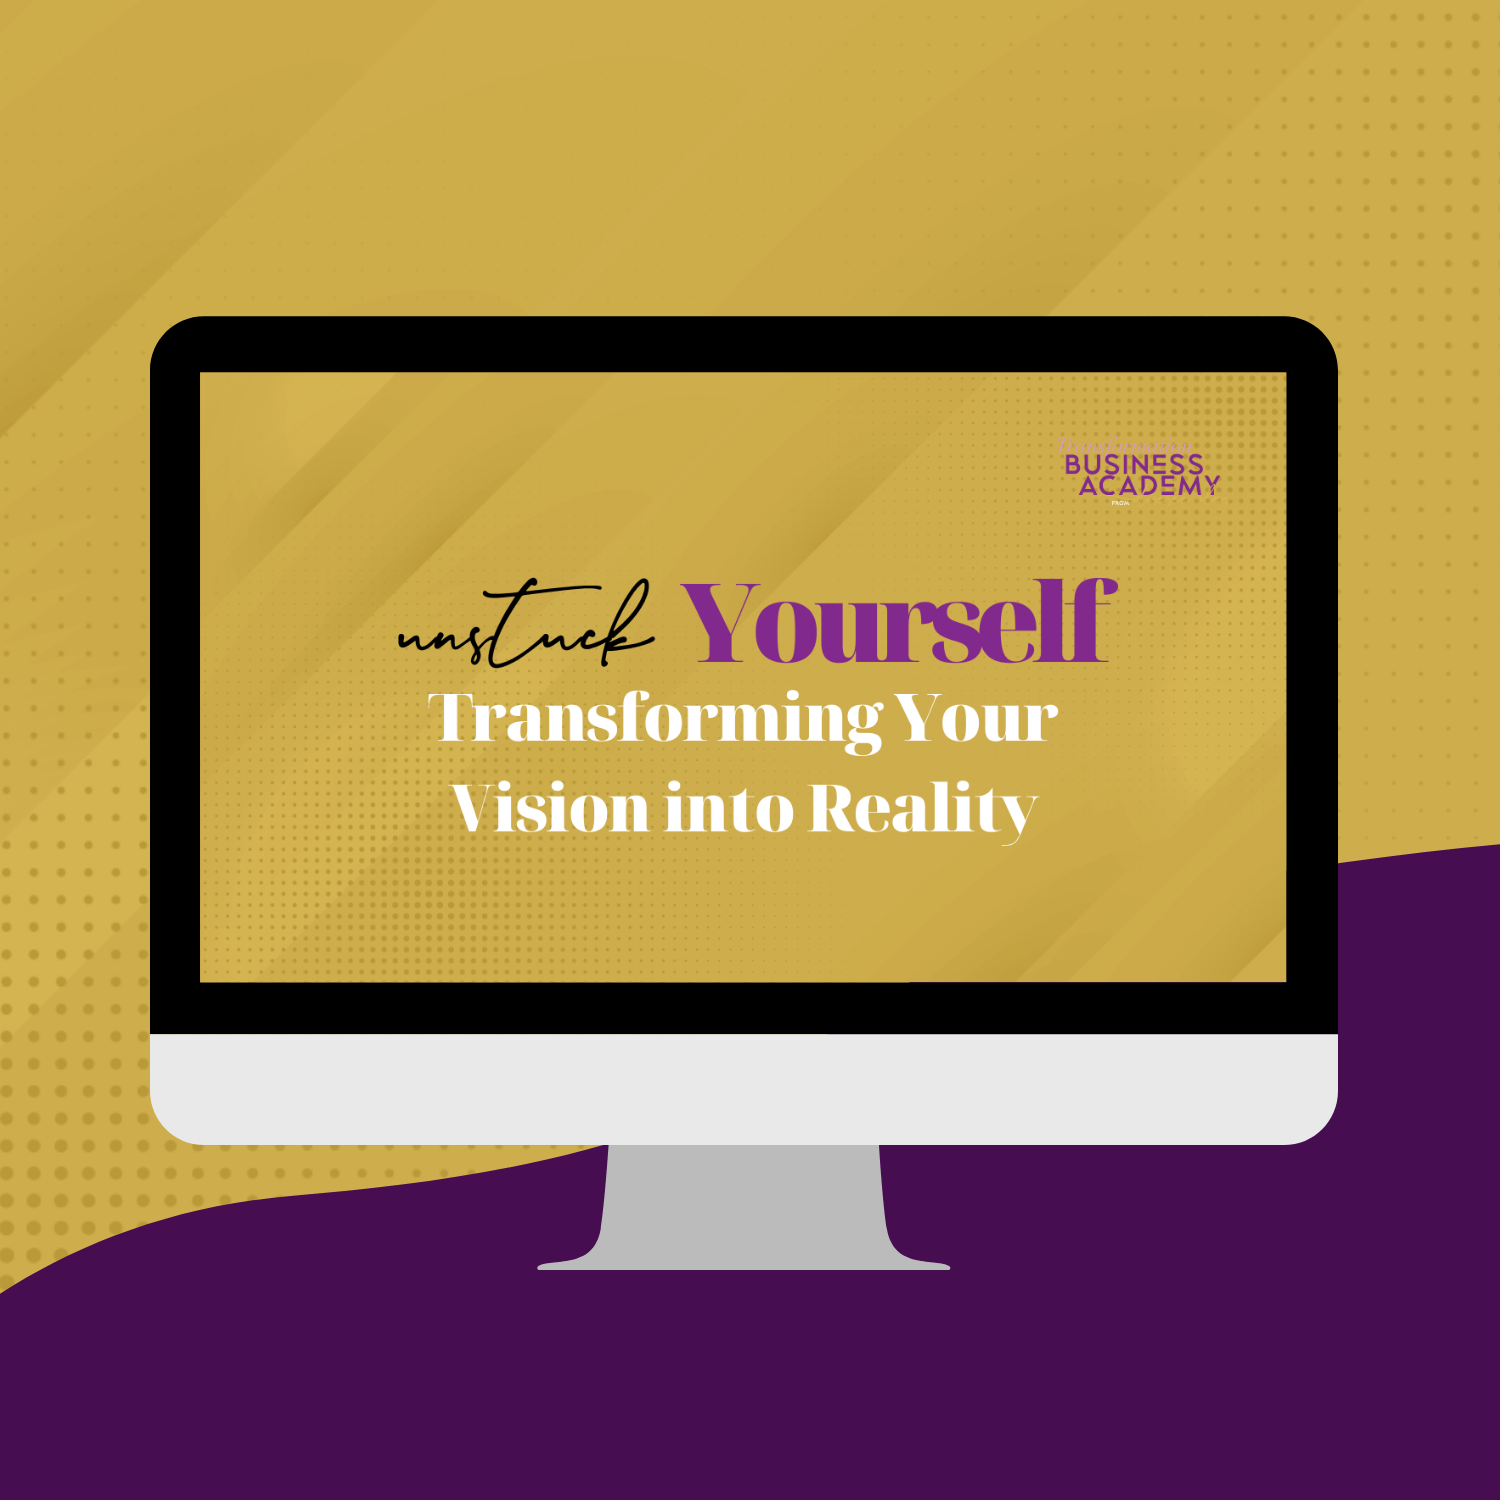 Unstuck Yourself: Transforming Your Vision Into Reality